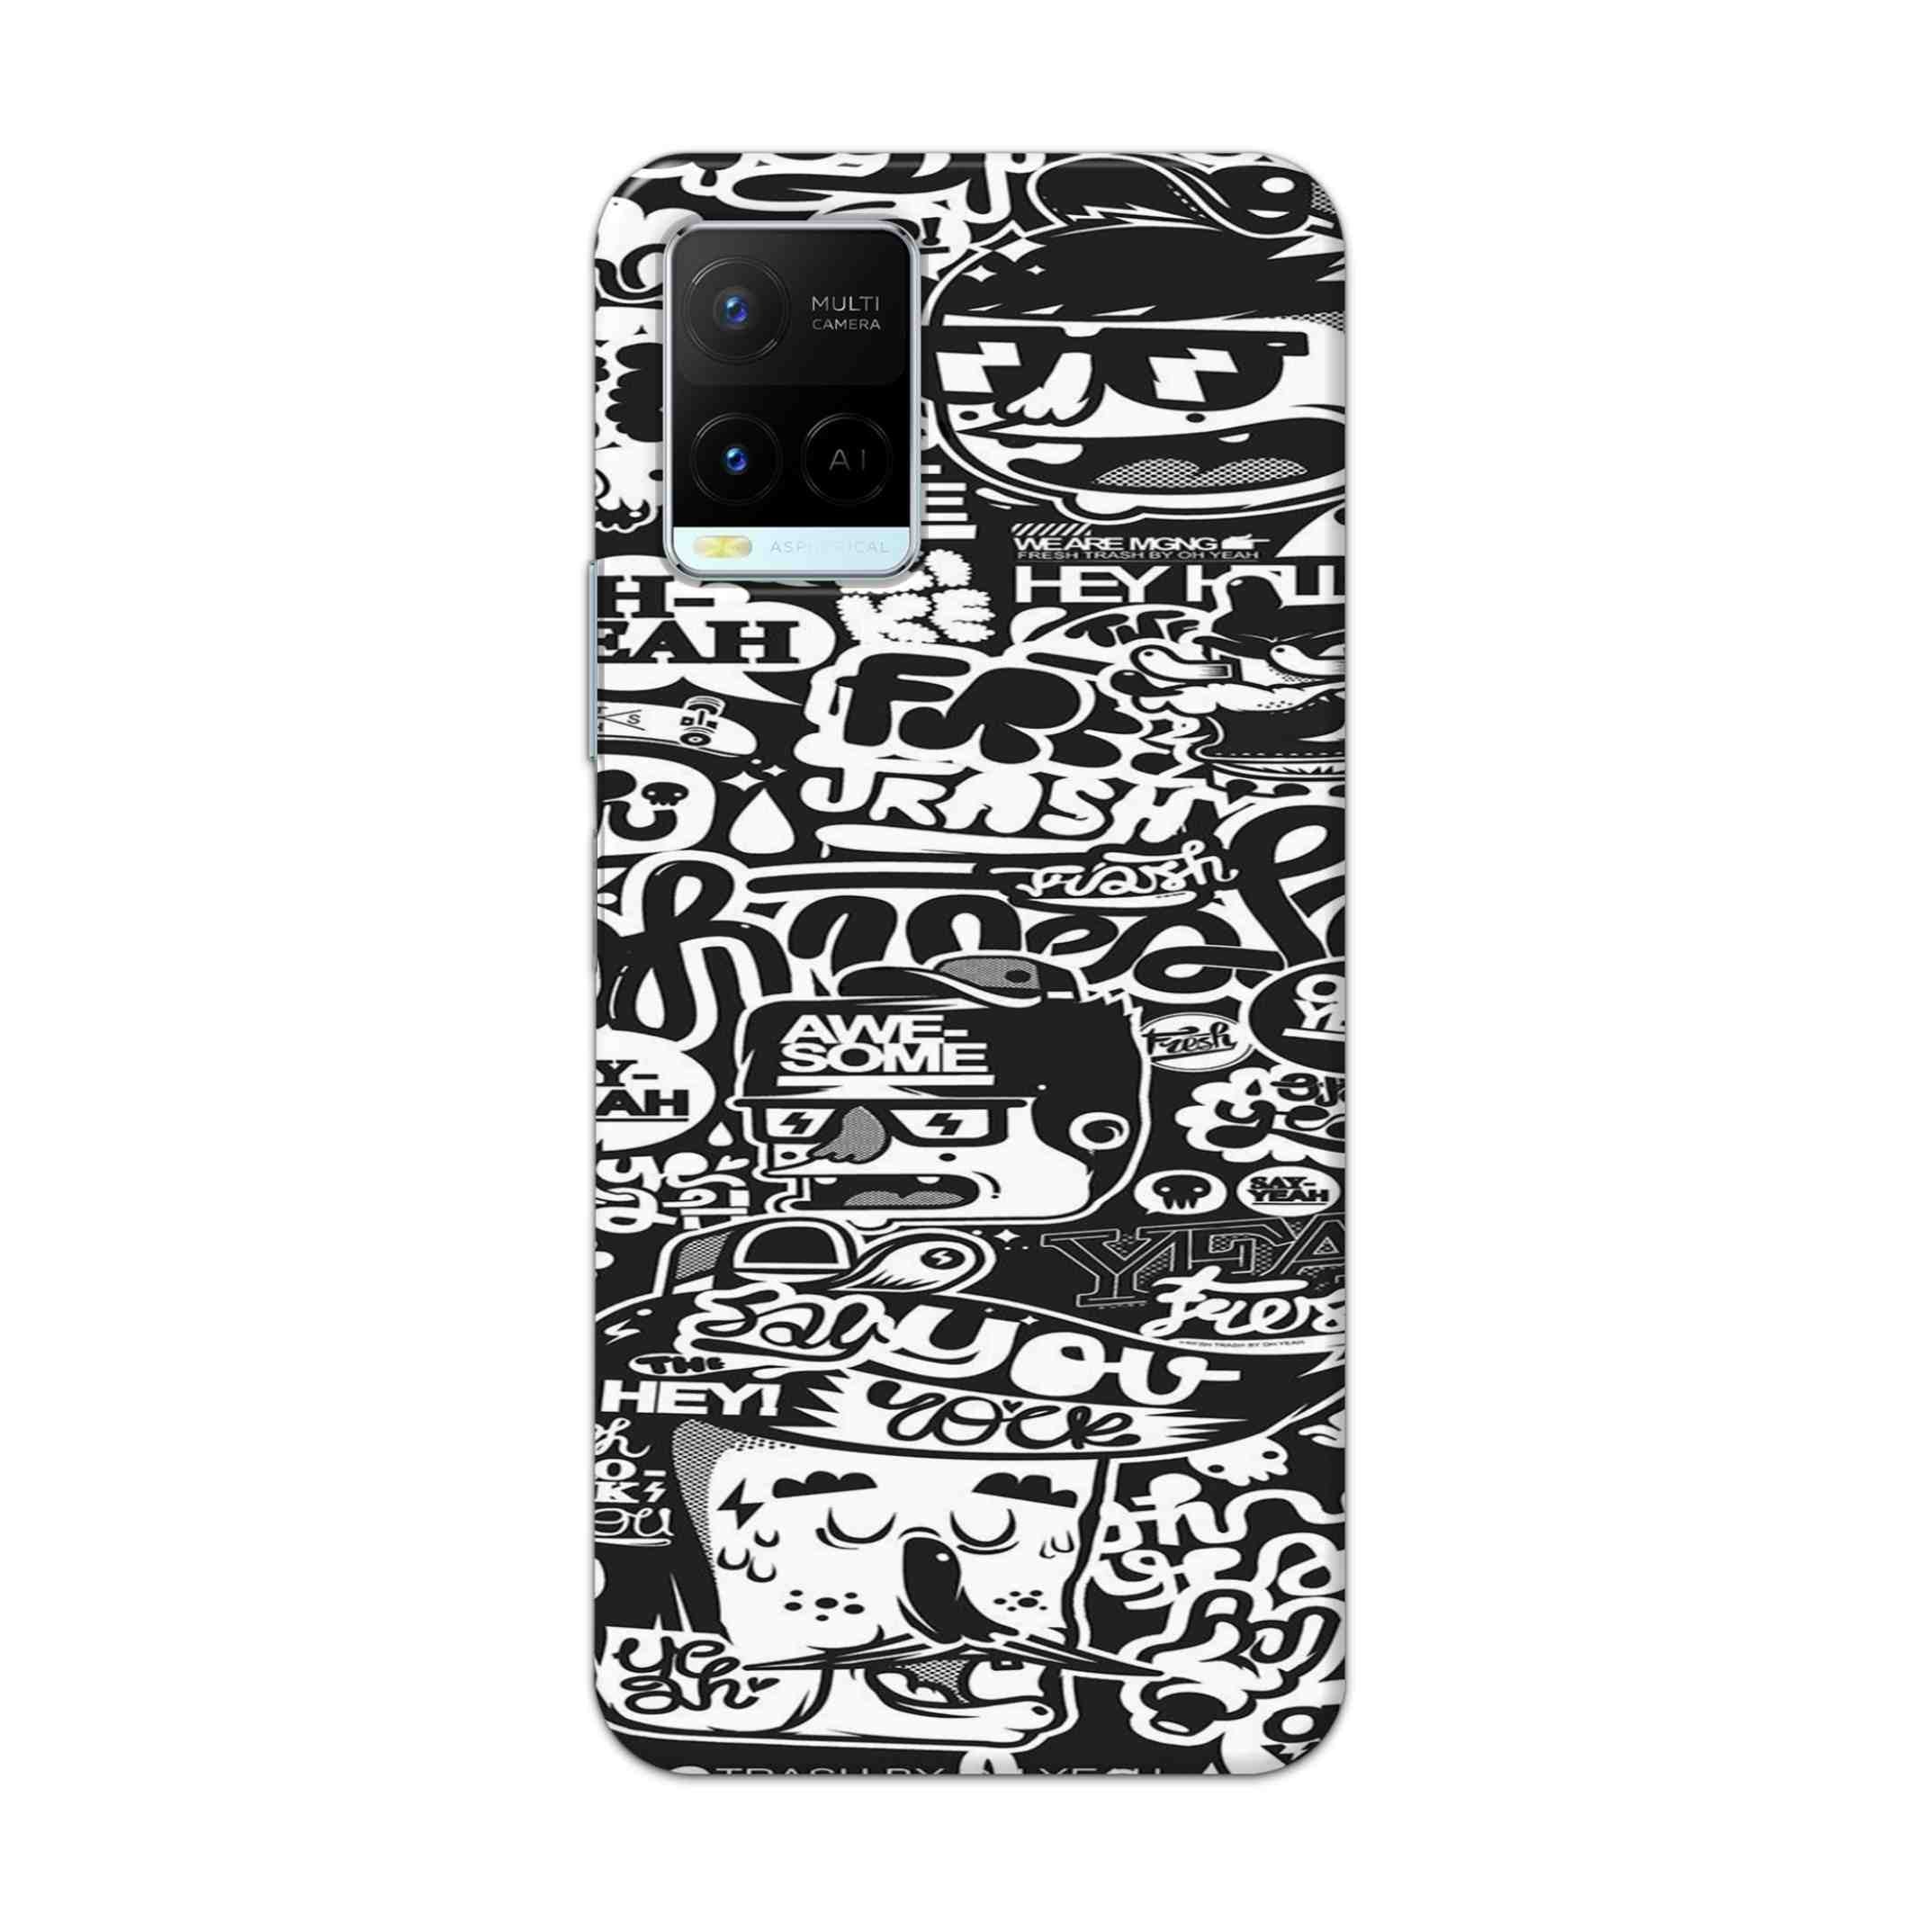 Buy Awesome Hard Back Mobile Phone Case Cover For Vivo Y21 2021 Online